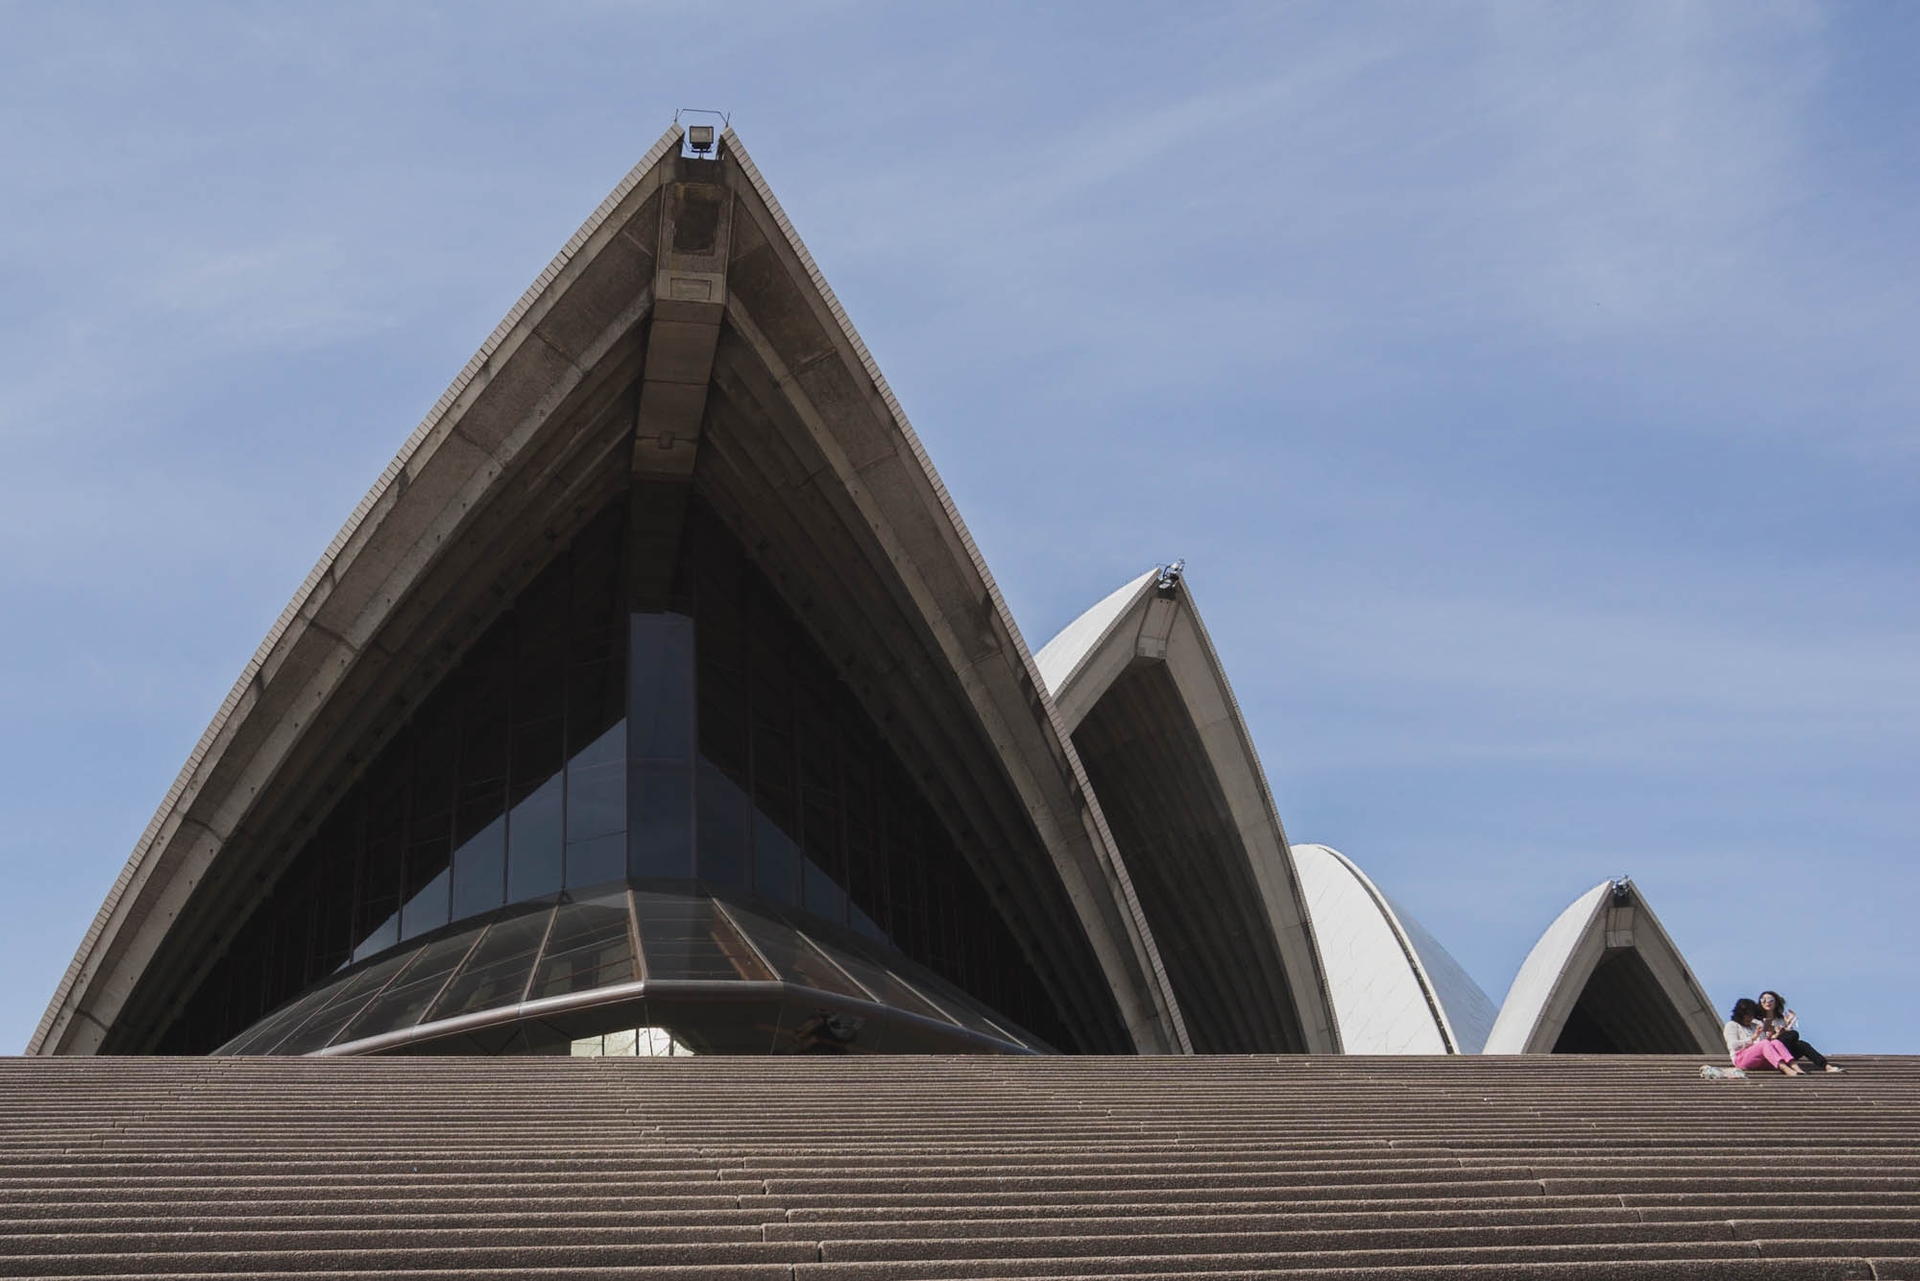 The Sydney Opera House in New South Wales, Australia